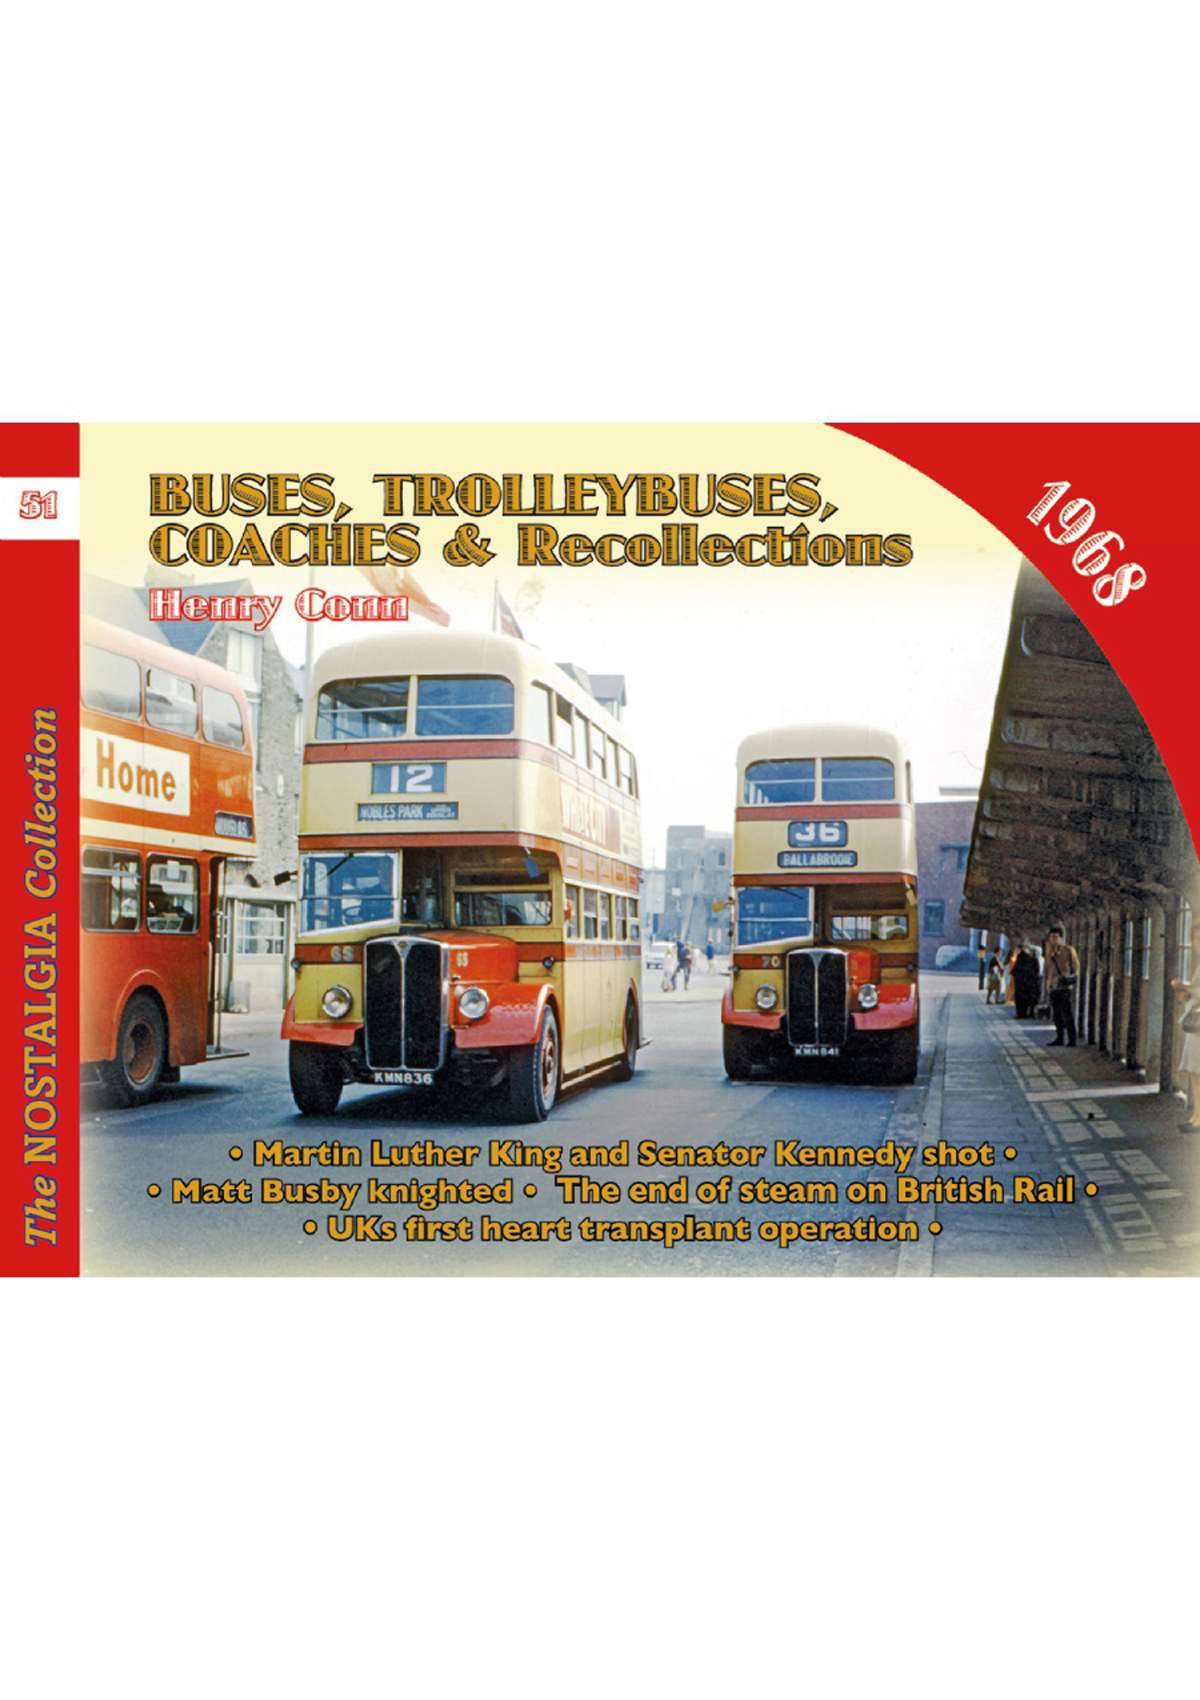 4501 - Vol 51: Buses, Trolleybuses, Coaches & Recollections 1968